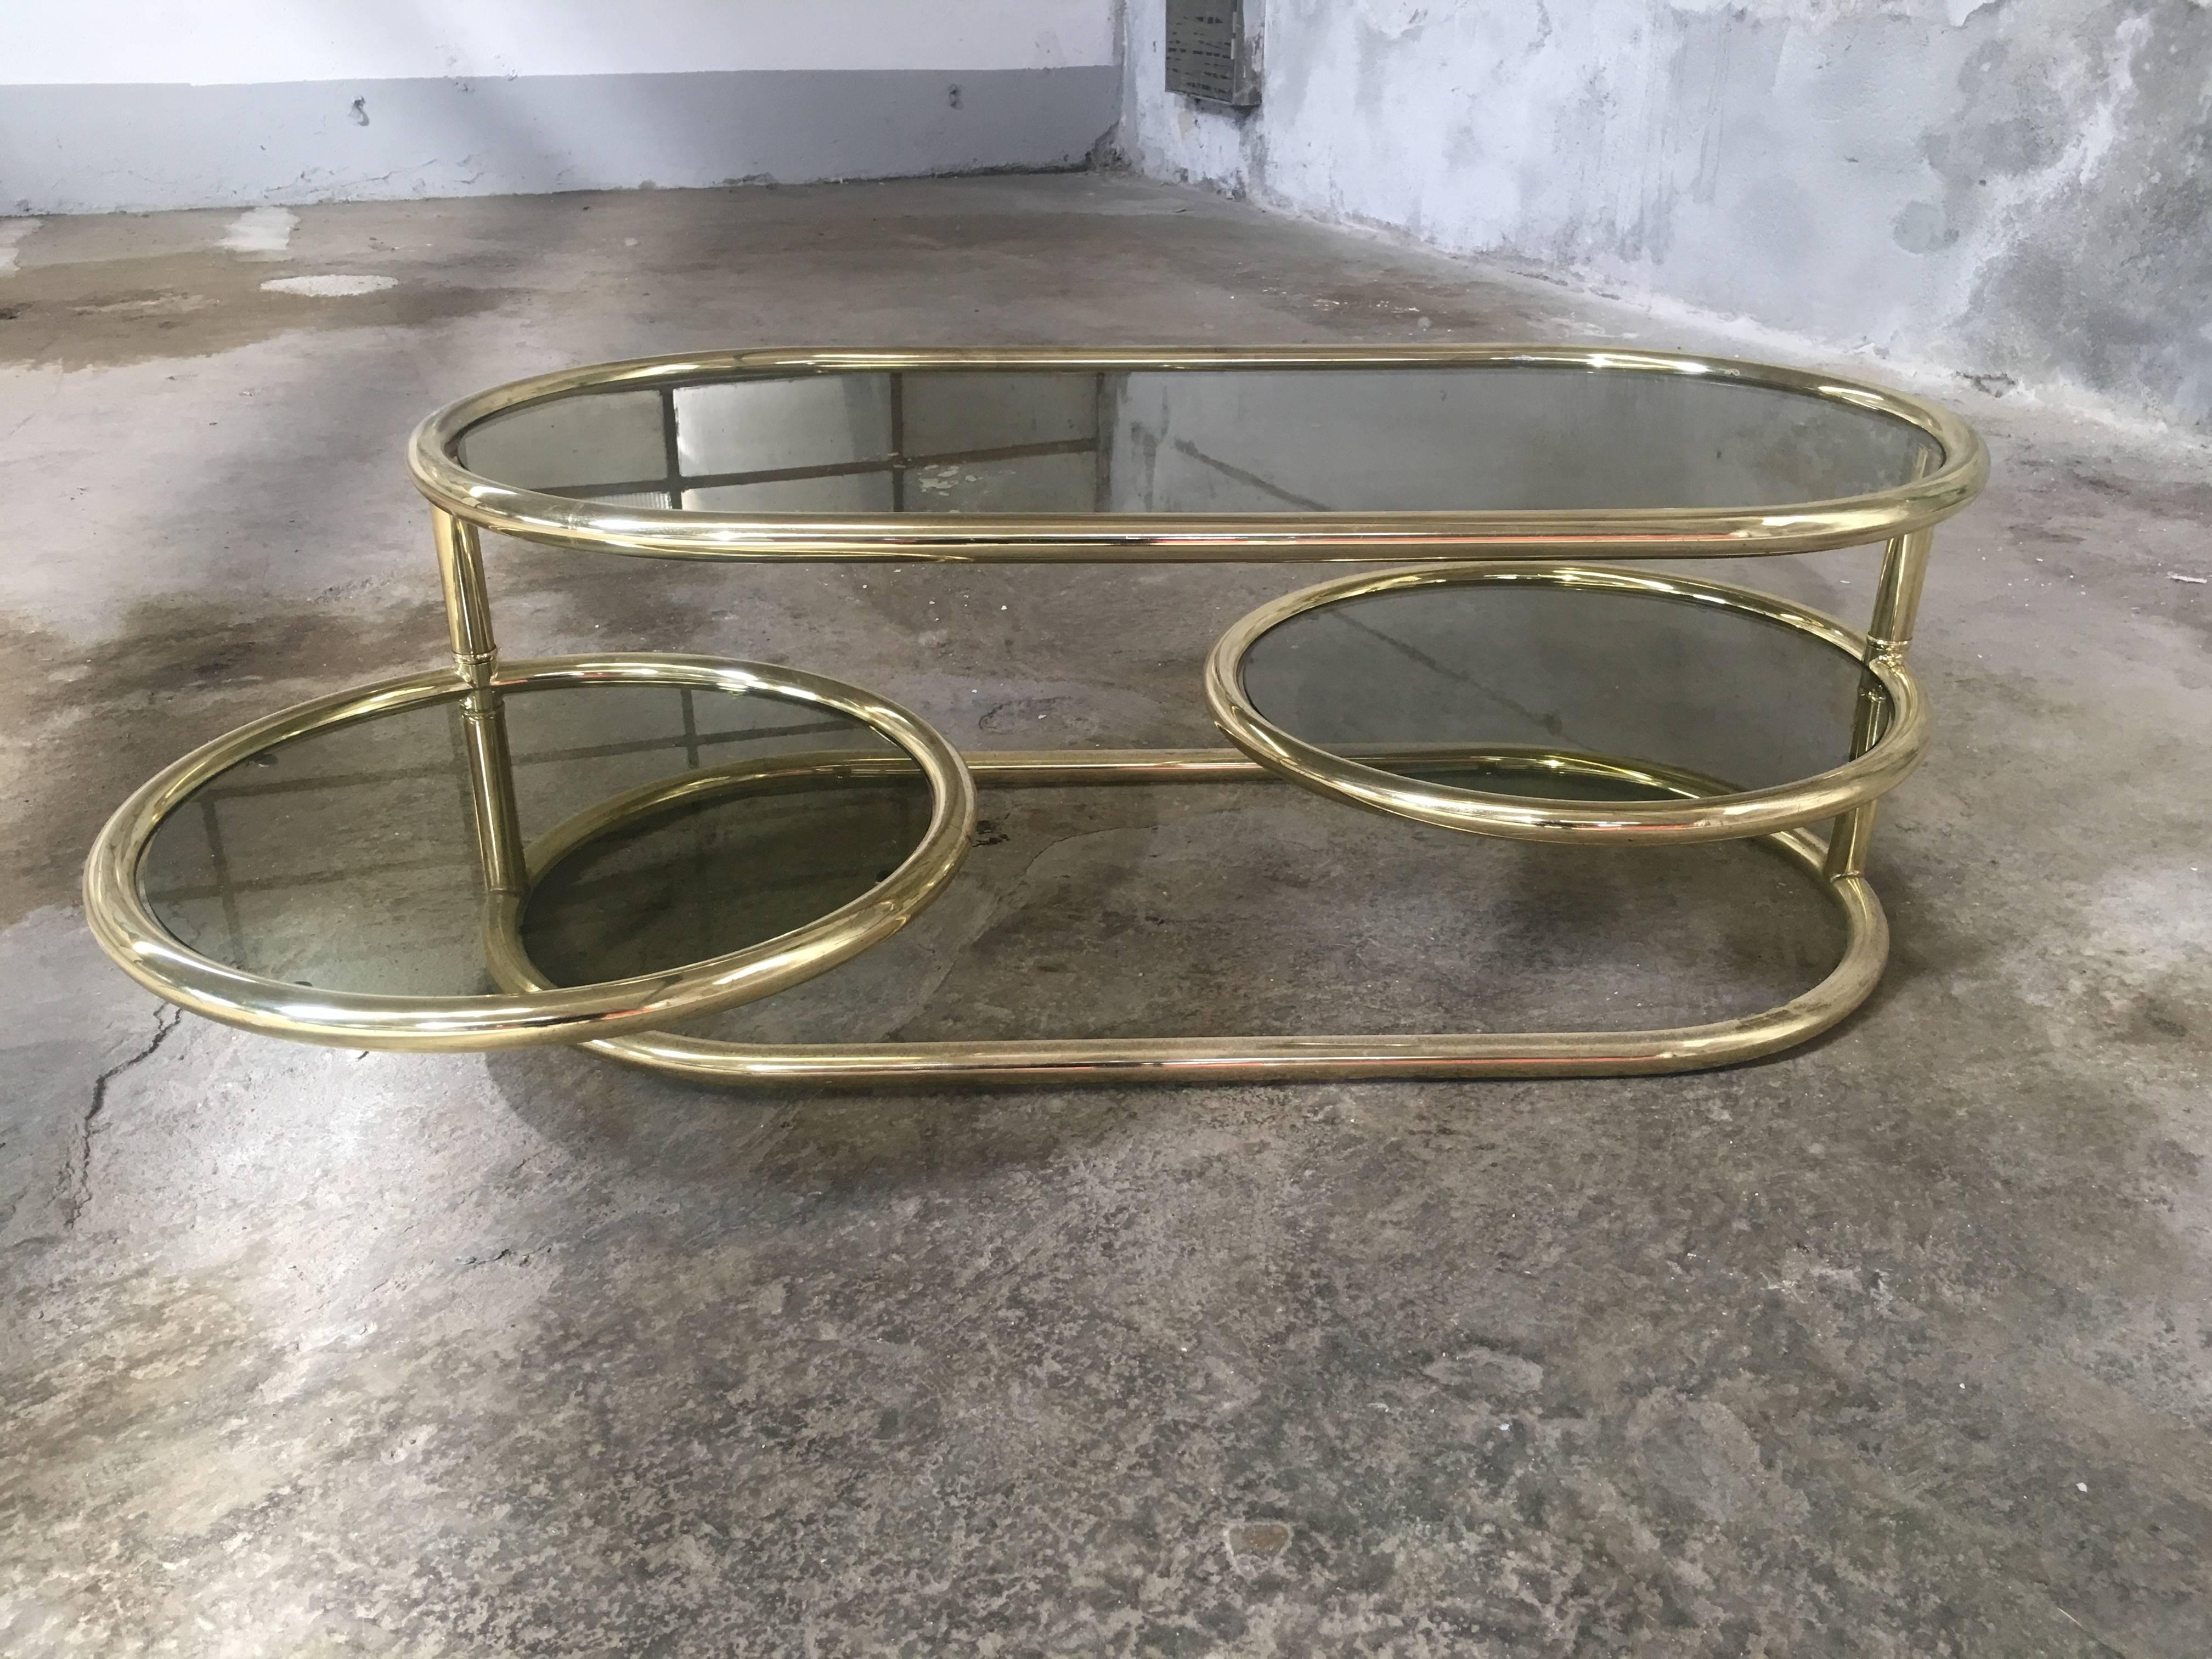 Gilt Italian Brass Metal Side Table from 1970s with Smoked Glass and Movable Shelves